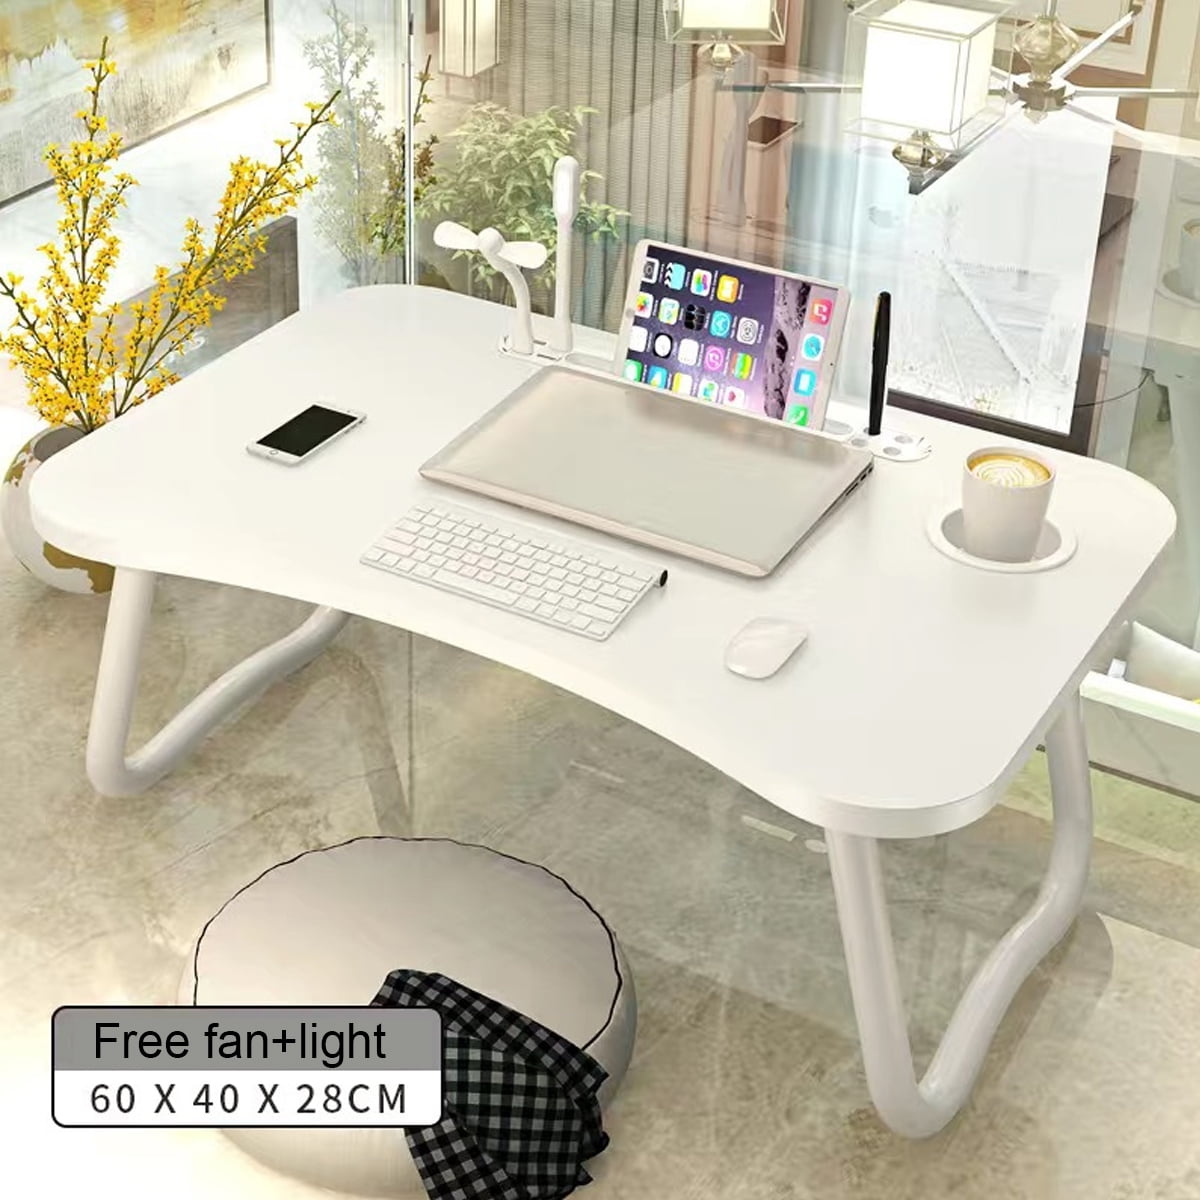 Foldable Portable Laptop Stand Bed Lazy Laptop Table Small Desk Breakfast Tray 